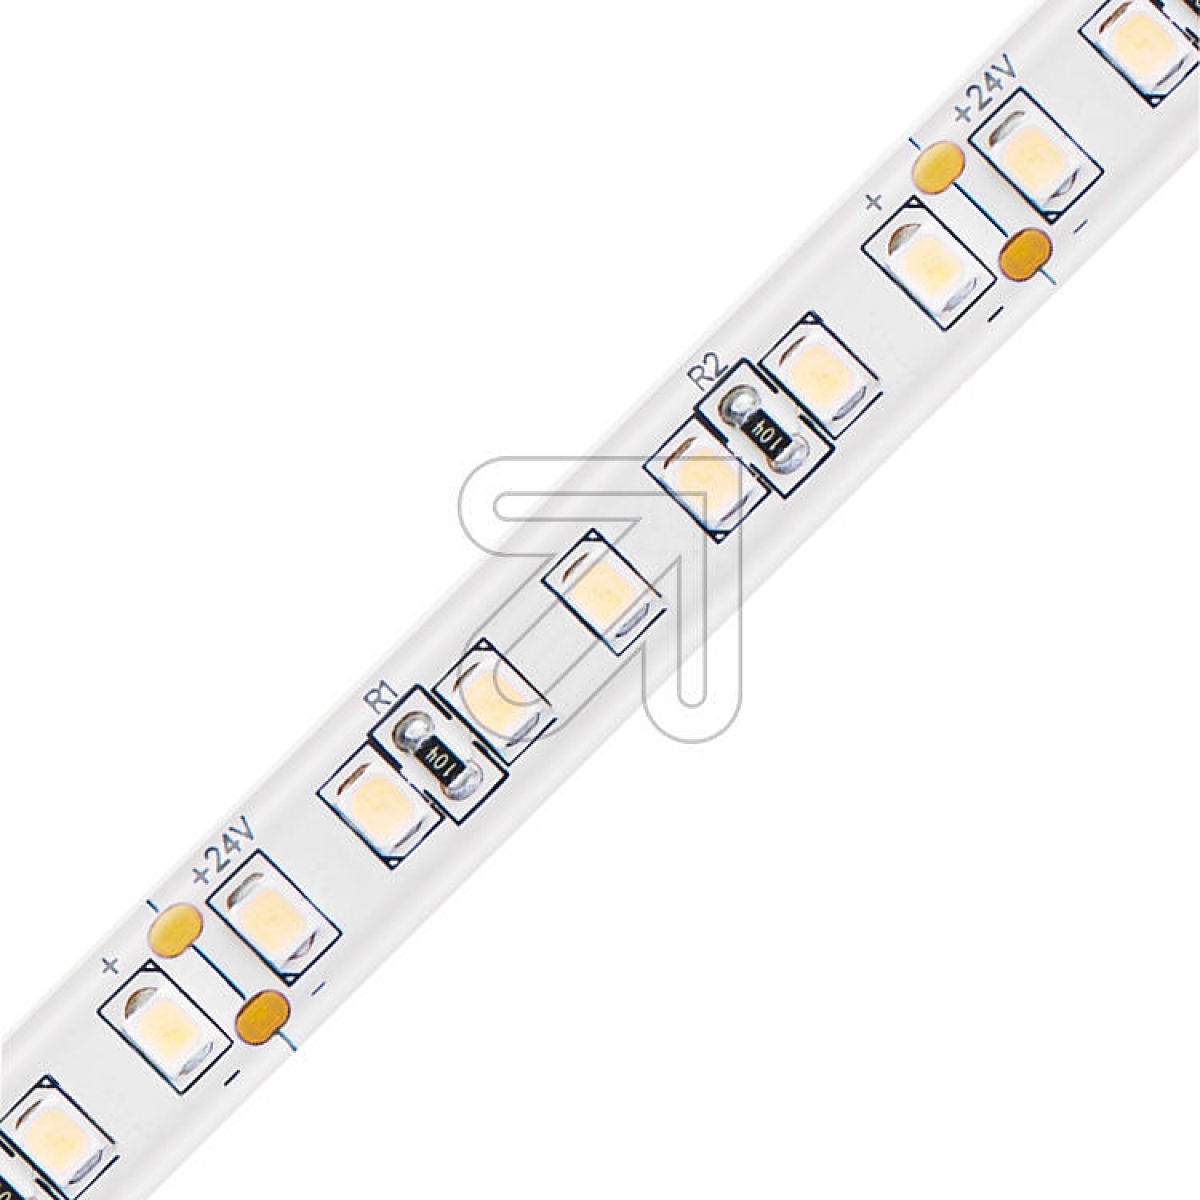 EVNLED strips roll 15m 48V IP54 72W 4000K IC544865284015MArticle-No: 689150